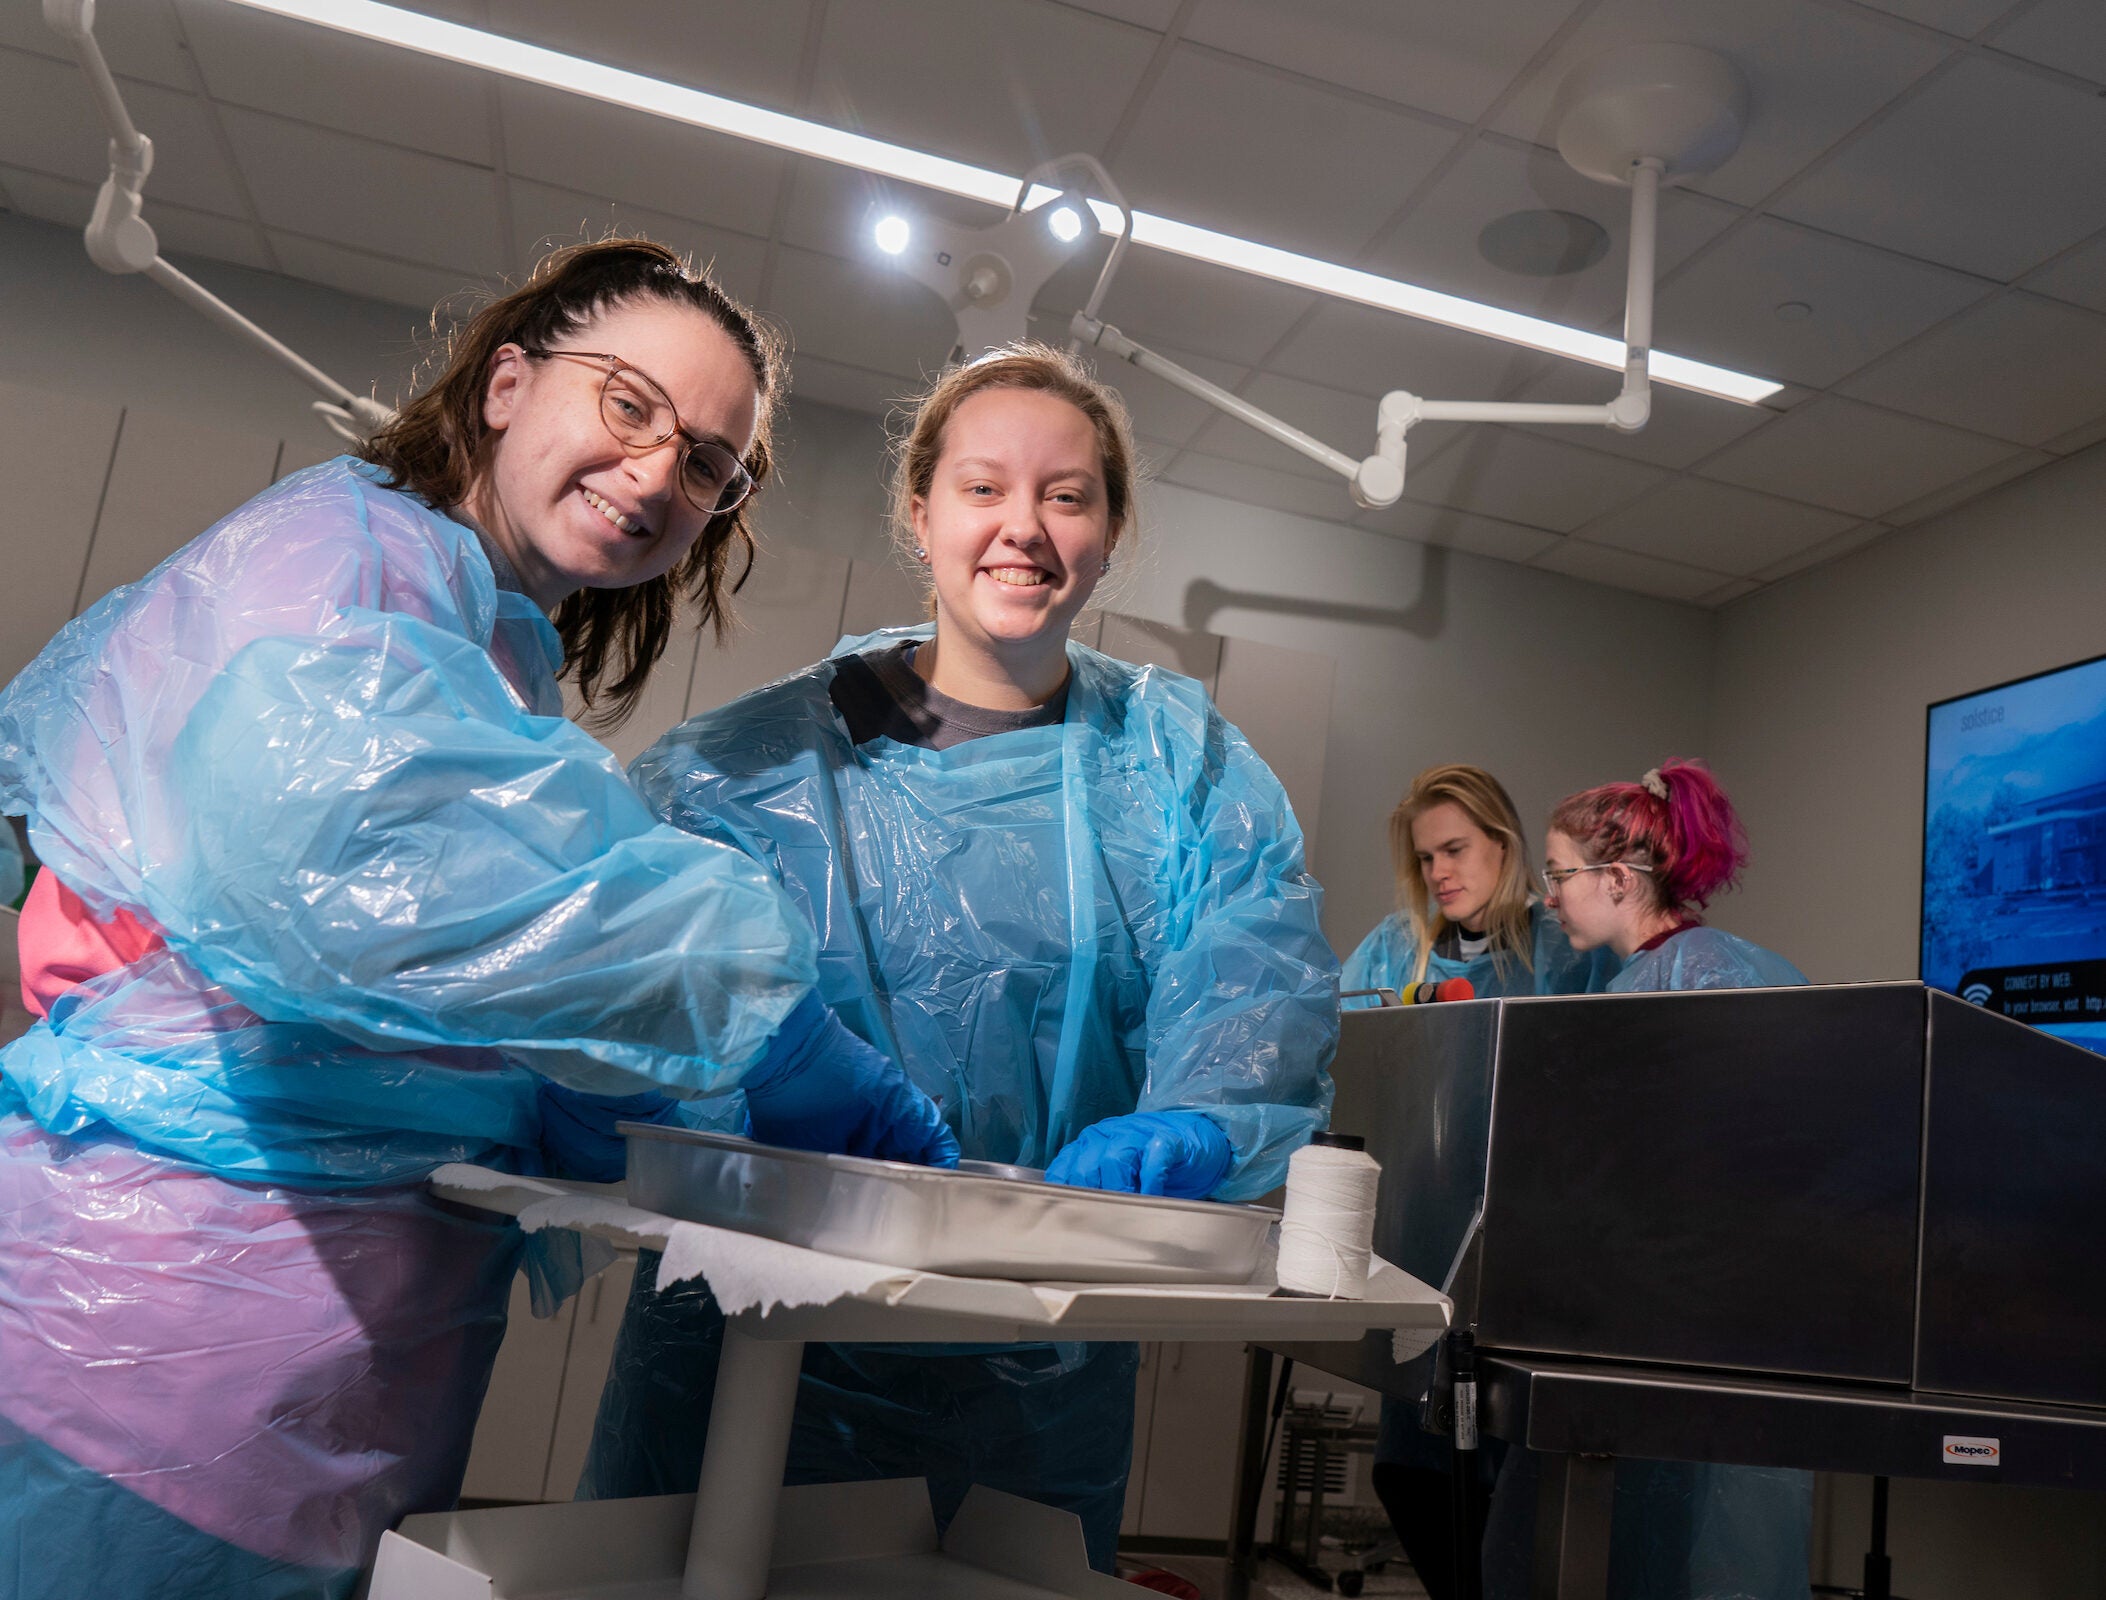 Athletic training students work in cadaver lab at LVC